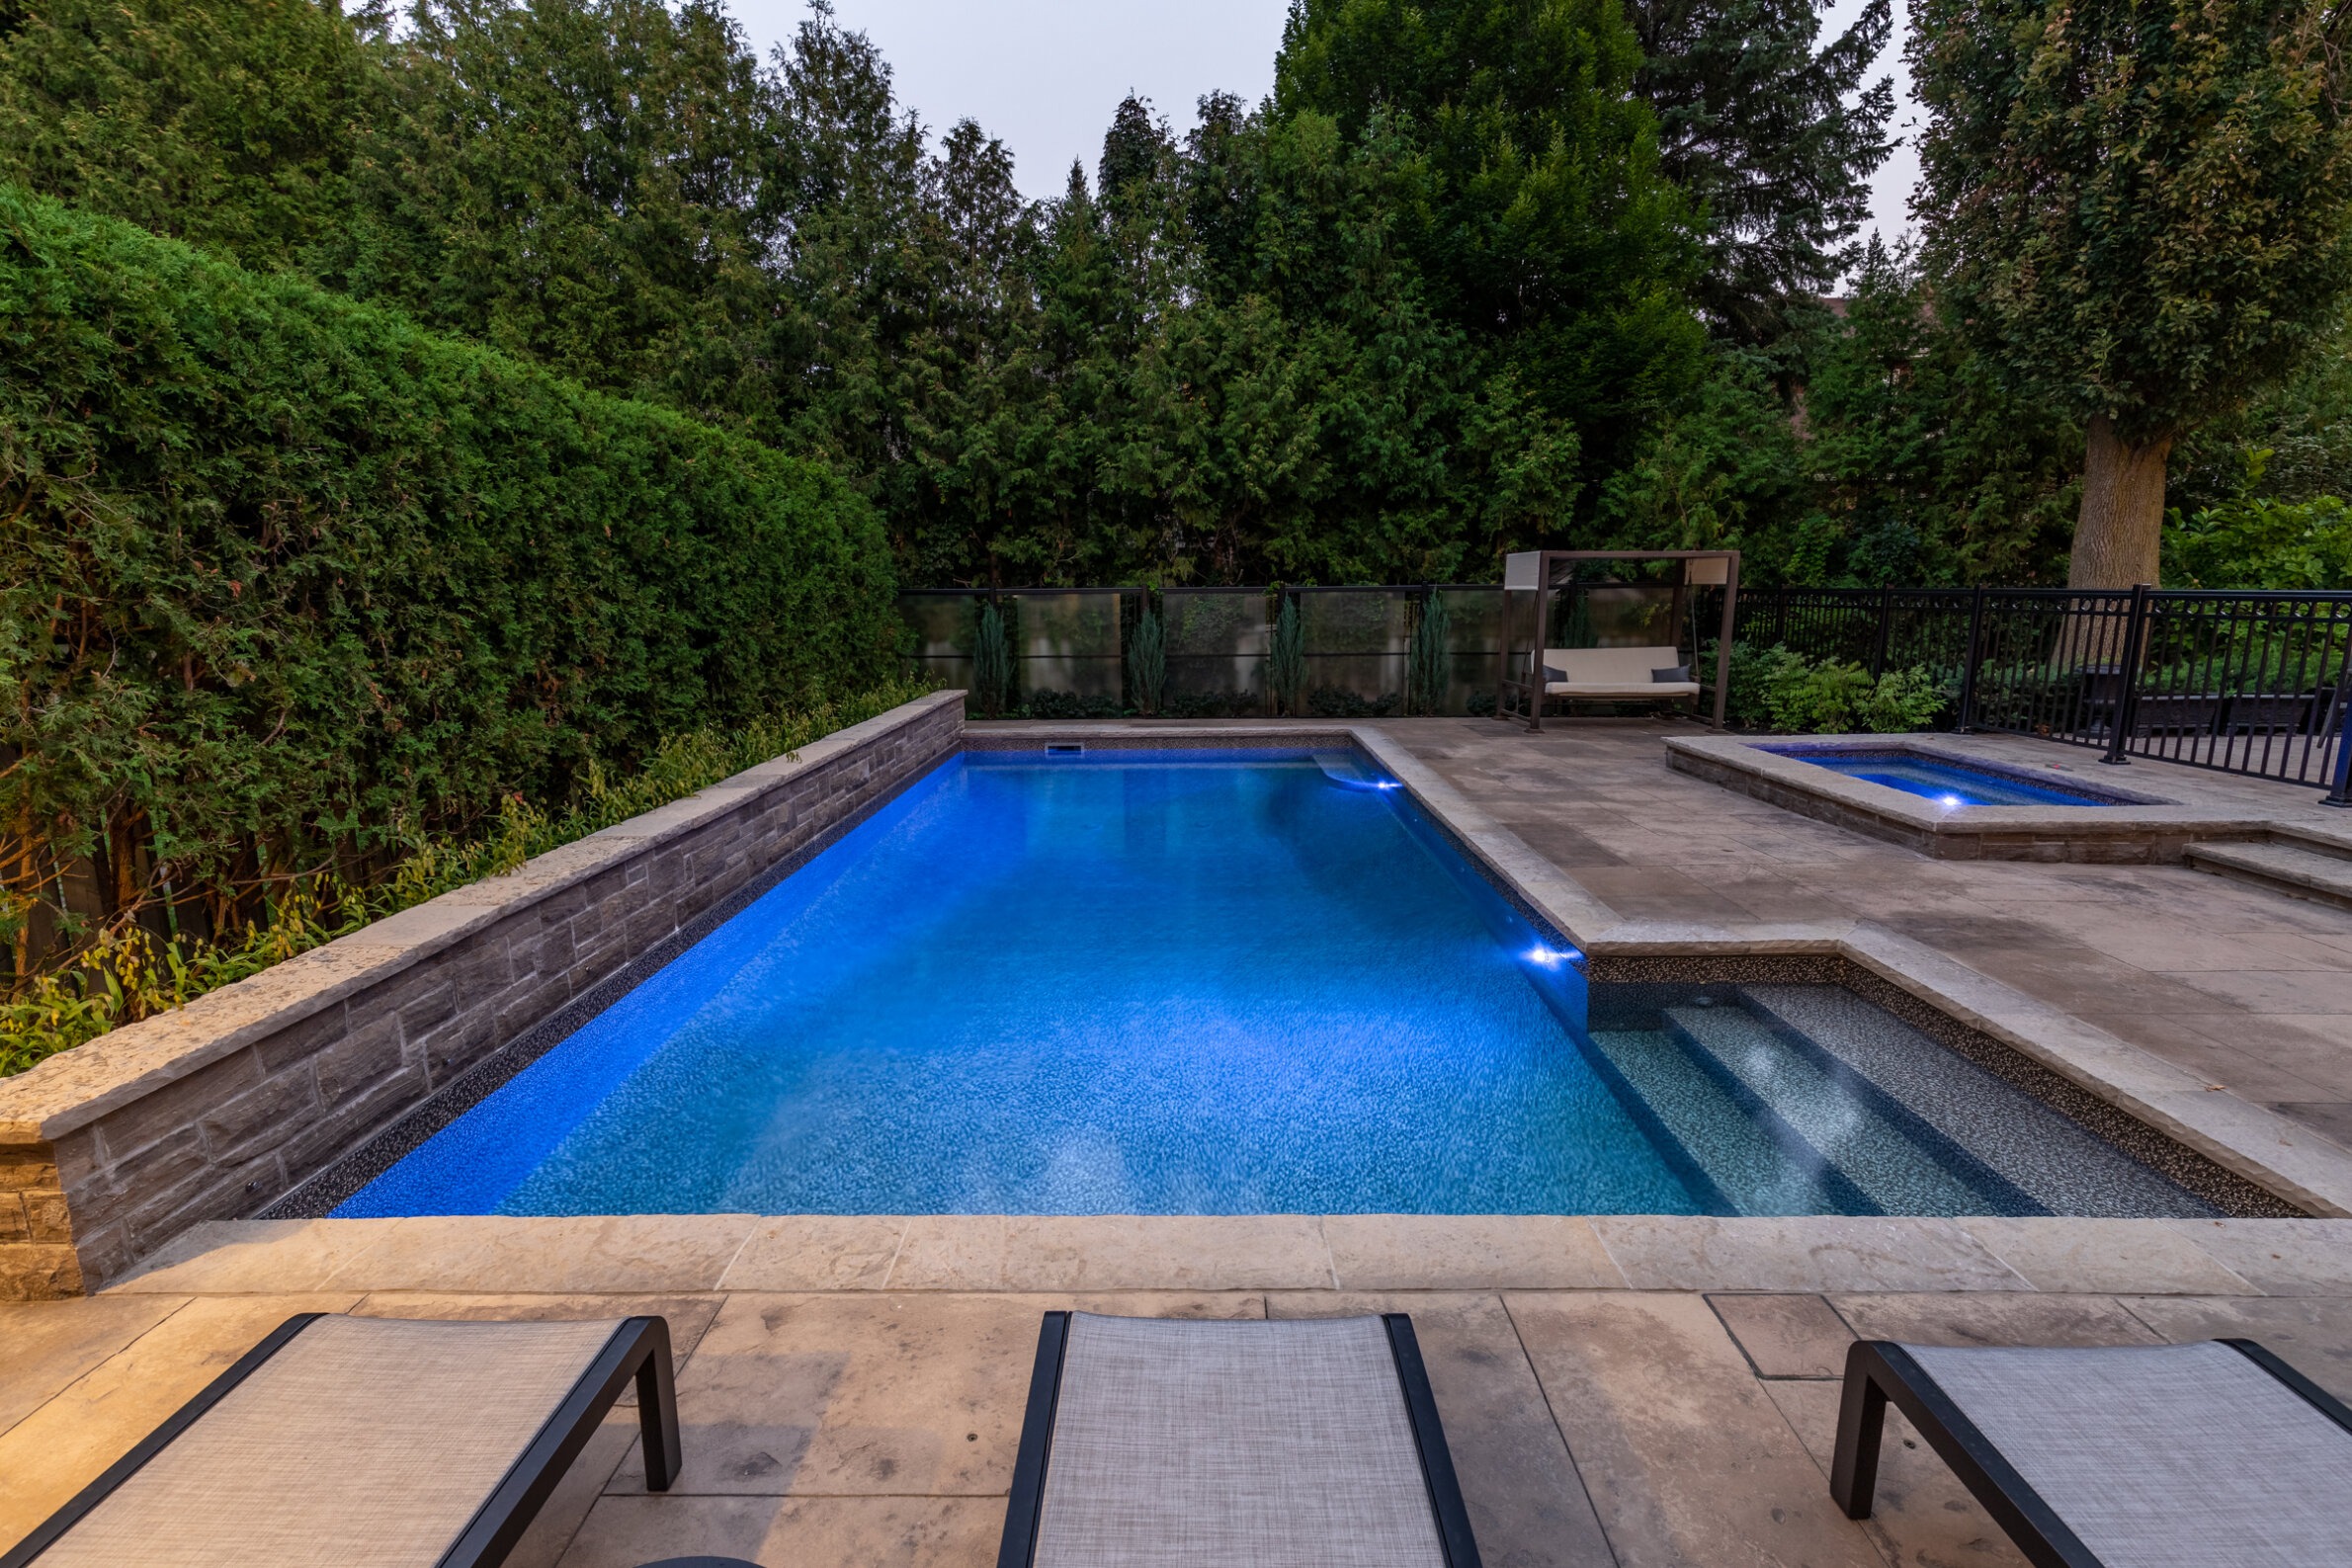 An outdoor swimming pool glows blue at dusk, surrounded by greenery and loungers, with a hot tub, steps, and a fence visible.